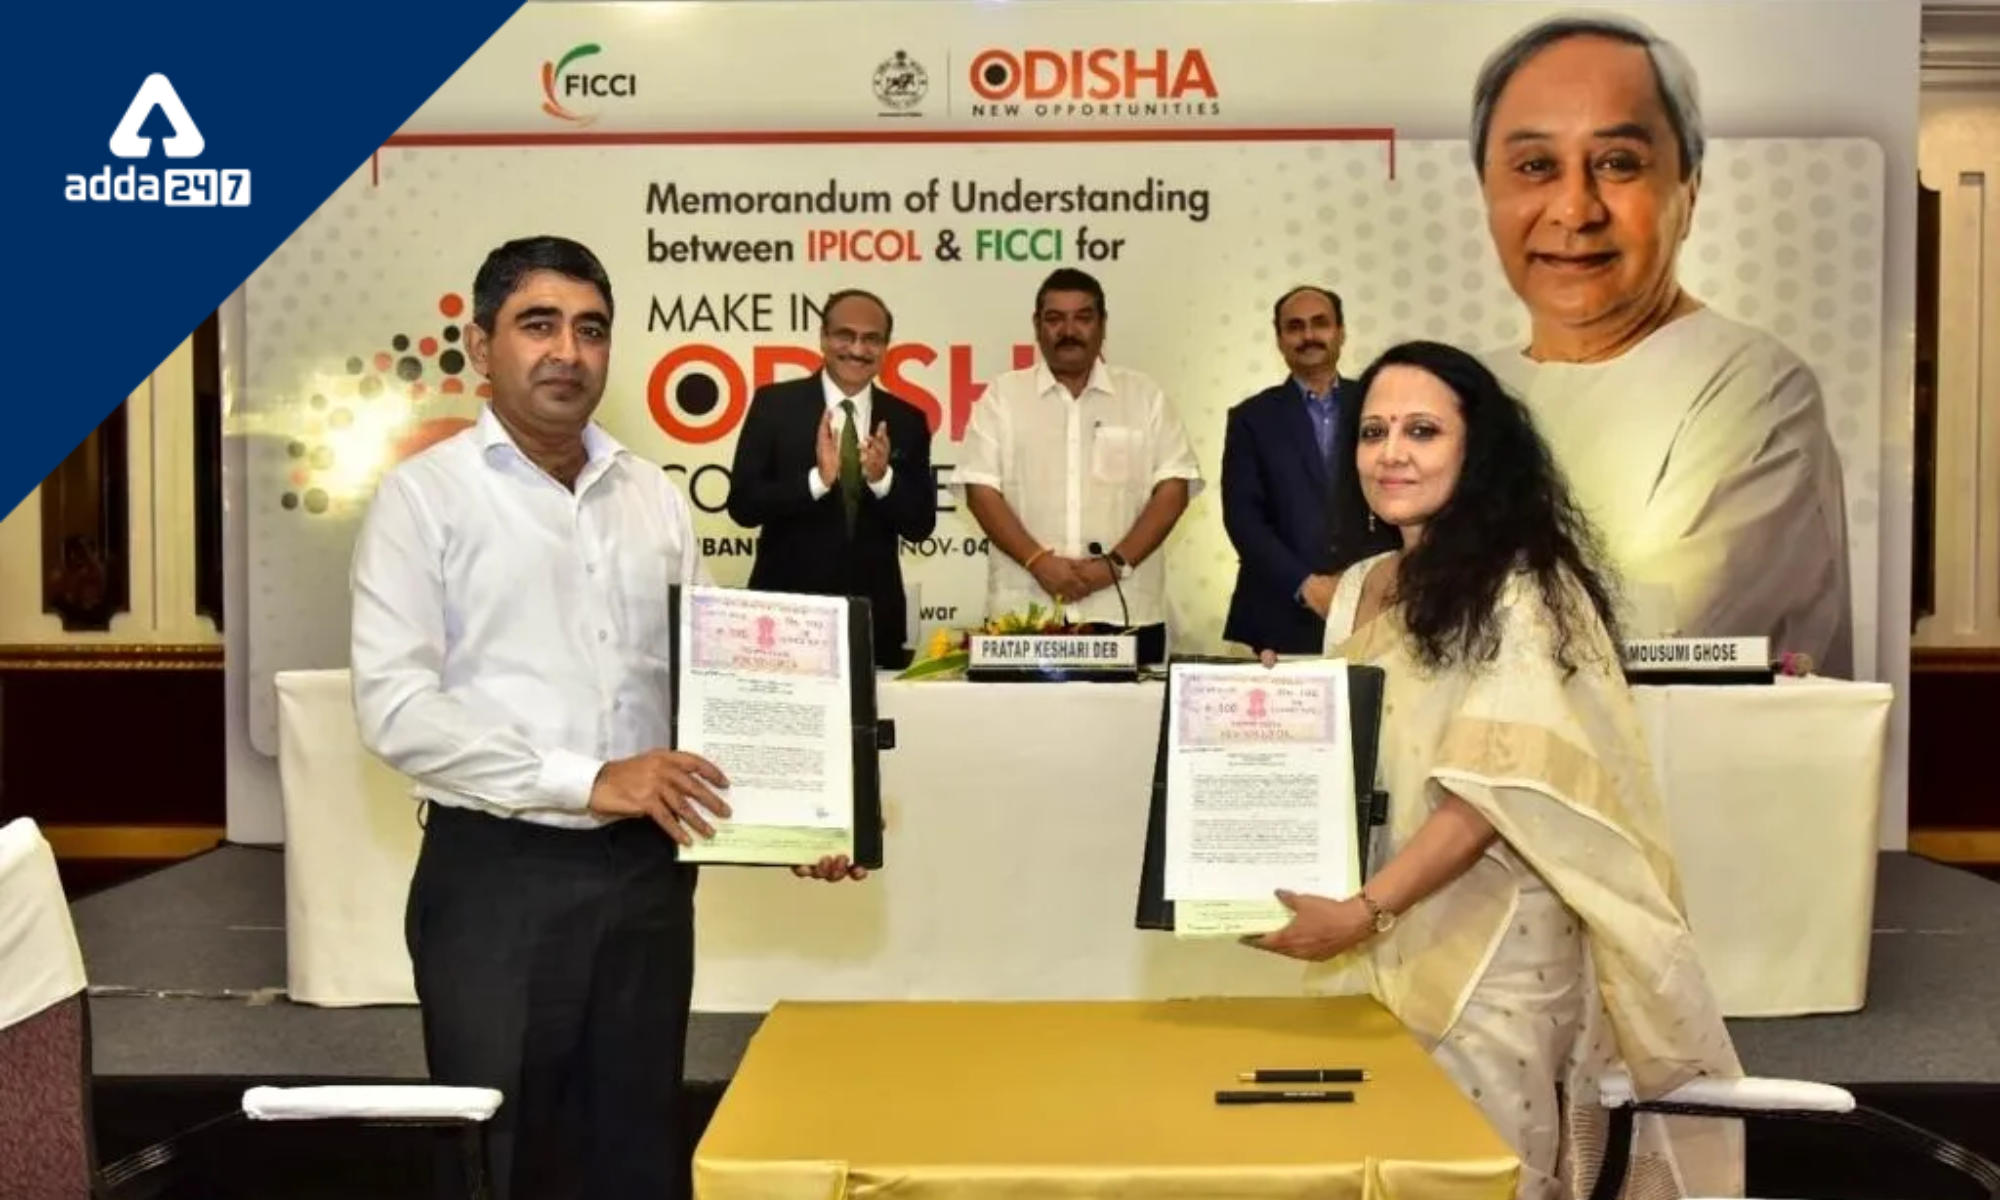 For next "Make in Odisha" summit in 2022, Odisha and FICCI ink an MoU_40.1